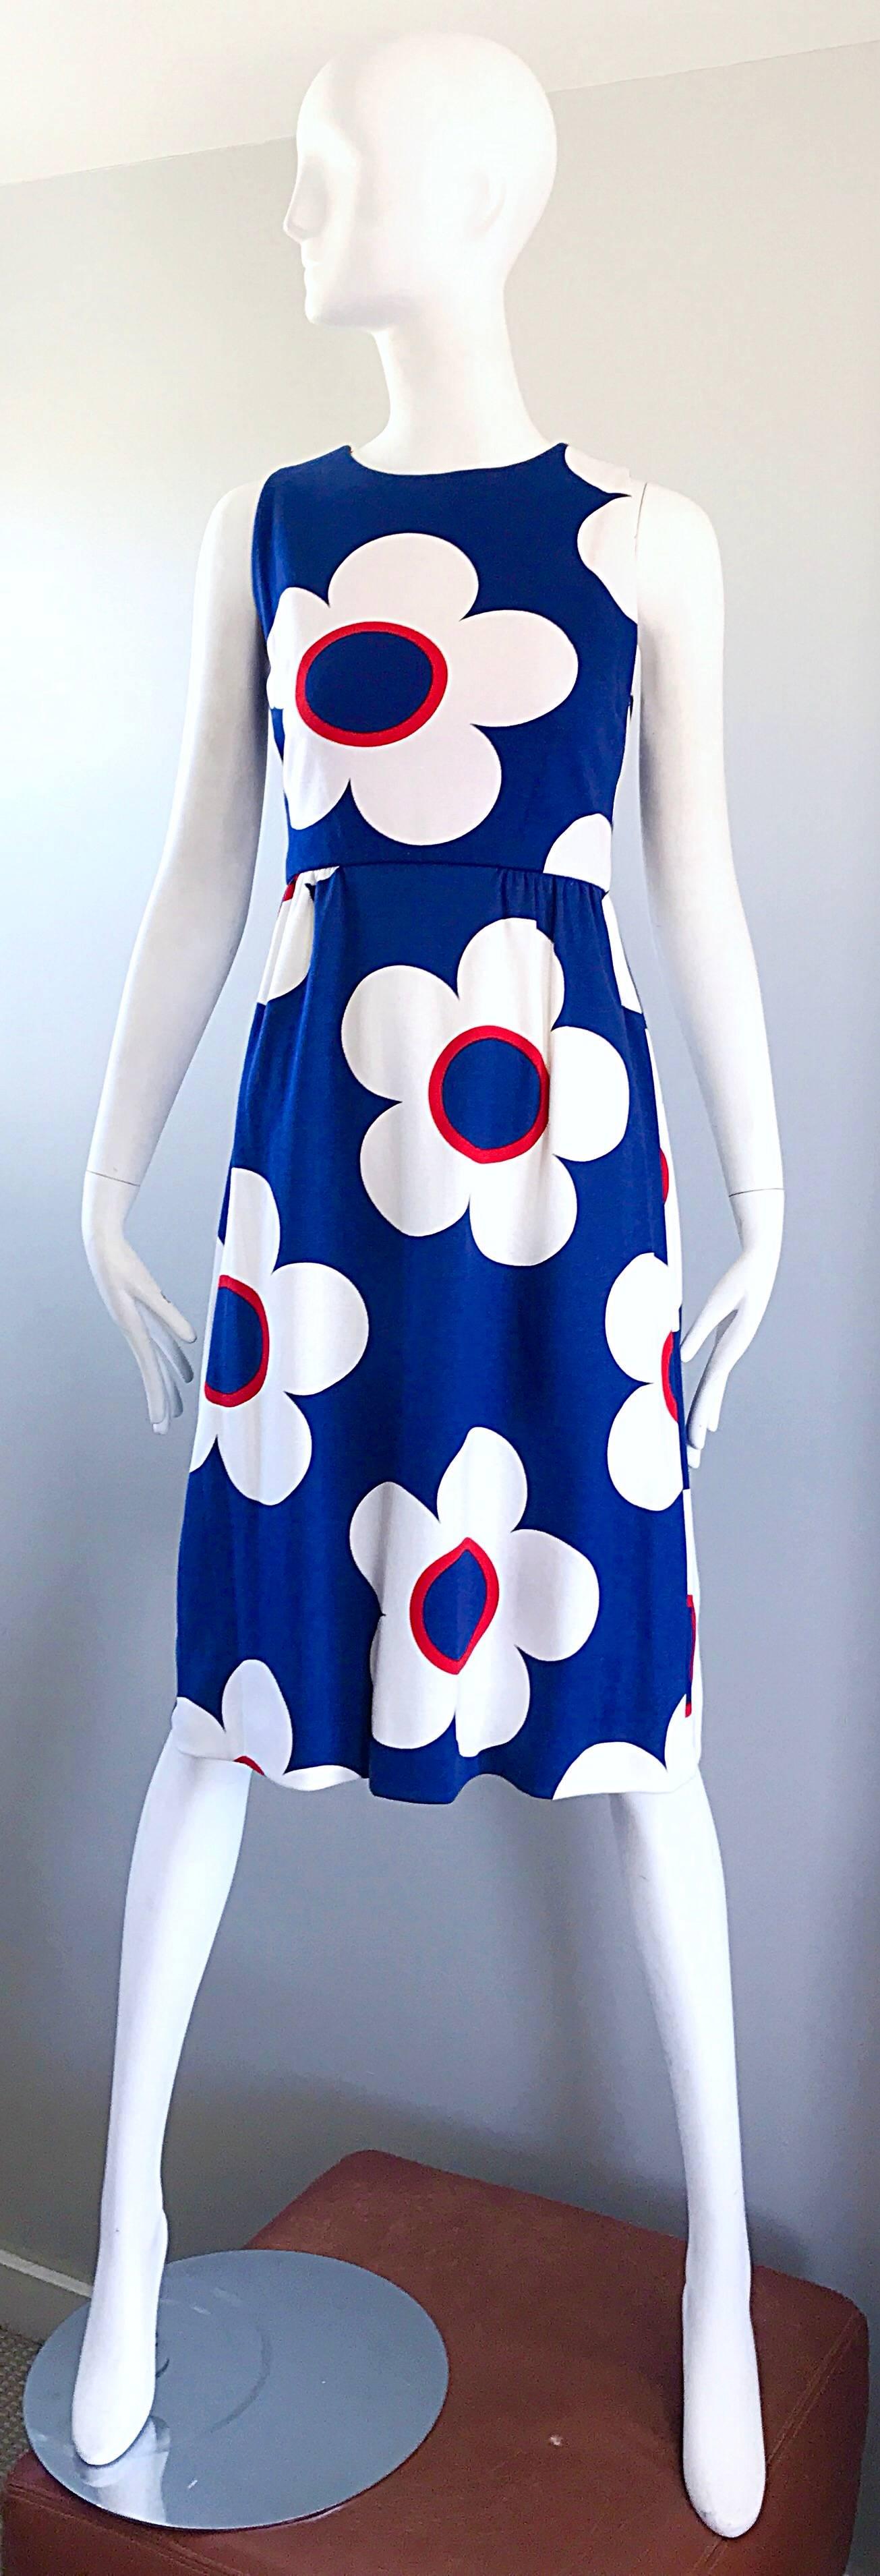 Sensational vintage demi couture navy blue, red and white cotton A-line dress and cropped short sleeve bolero jacket! Features mod flowers throughout both pieces. Full teal zipper up the back with hook-and-eye closure. Fitted bodice with a